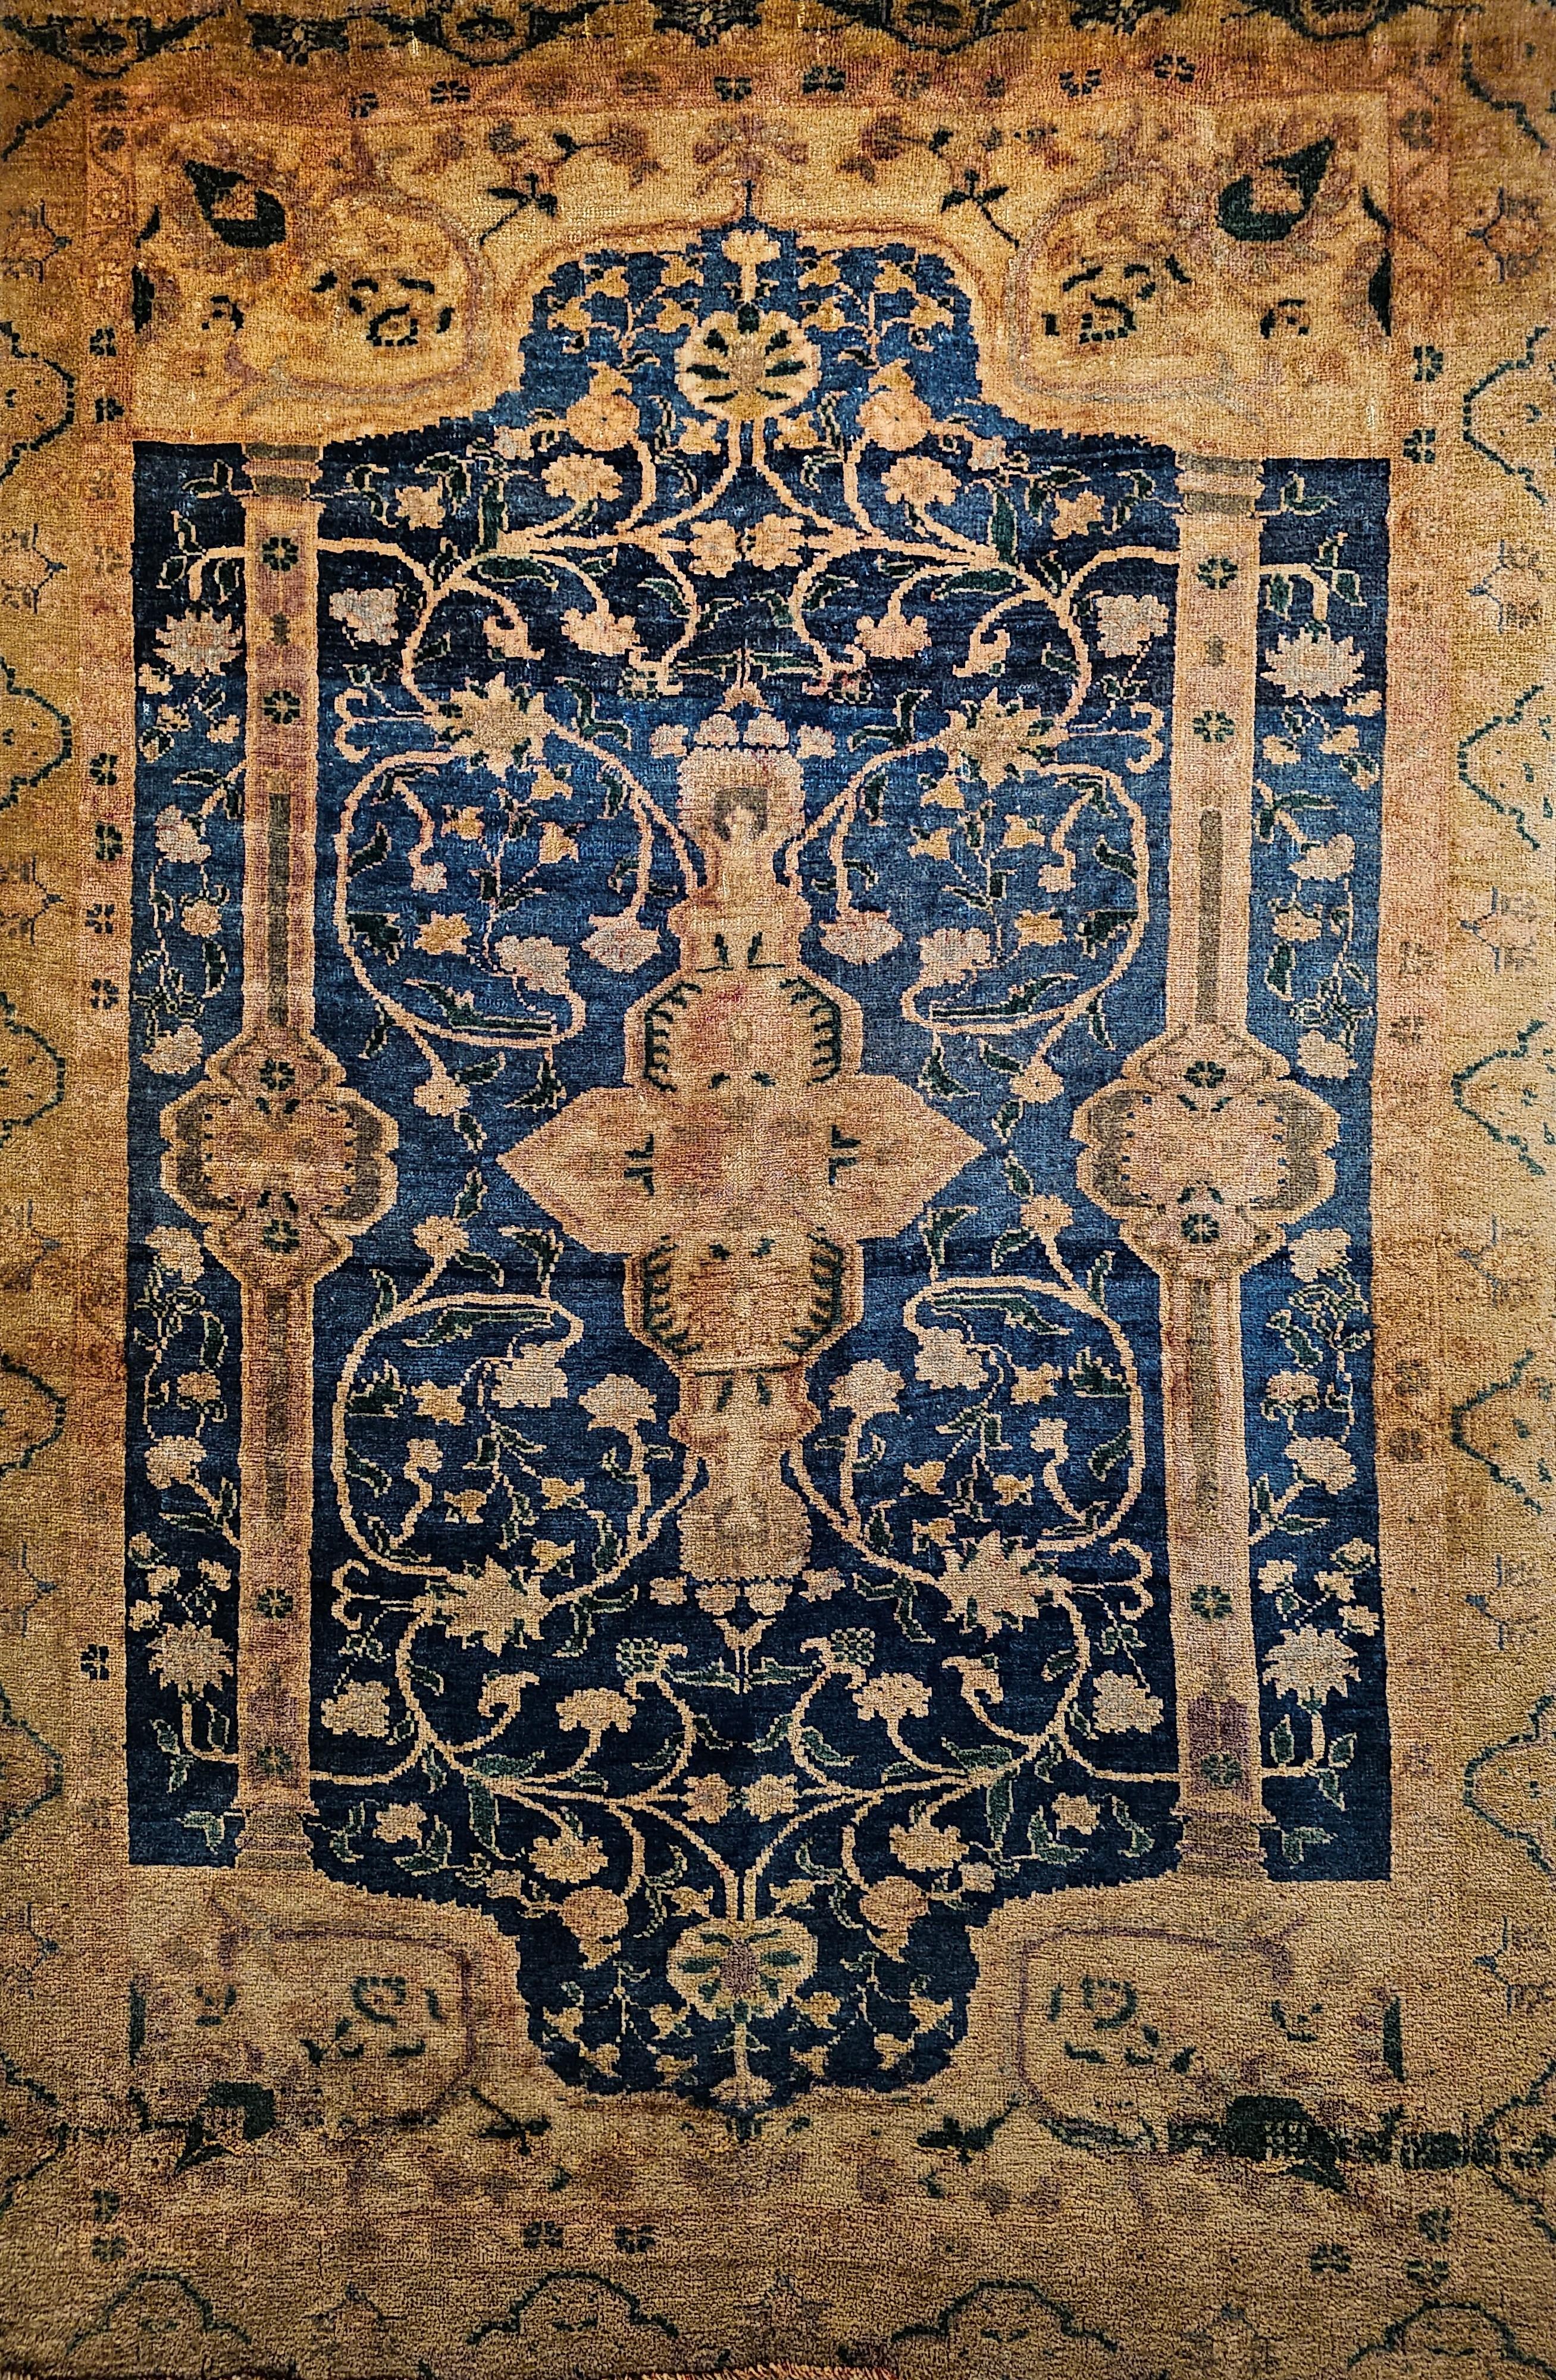 A vintage Turkish Oushak area rug with a botanical pattern in abrash French blue, green, and ivory colors from the early 1900s.  The rug has a beautiful abrash royal blue field color with a cream color border and a central medallion.  There are two